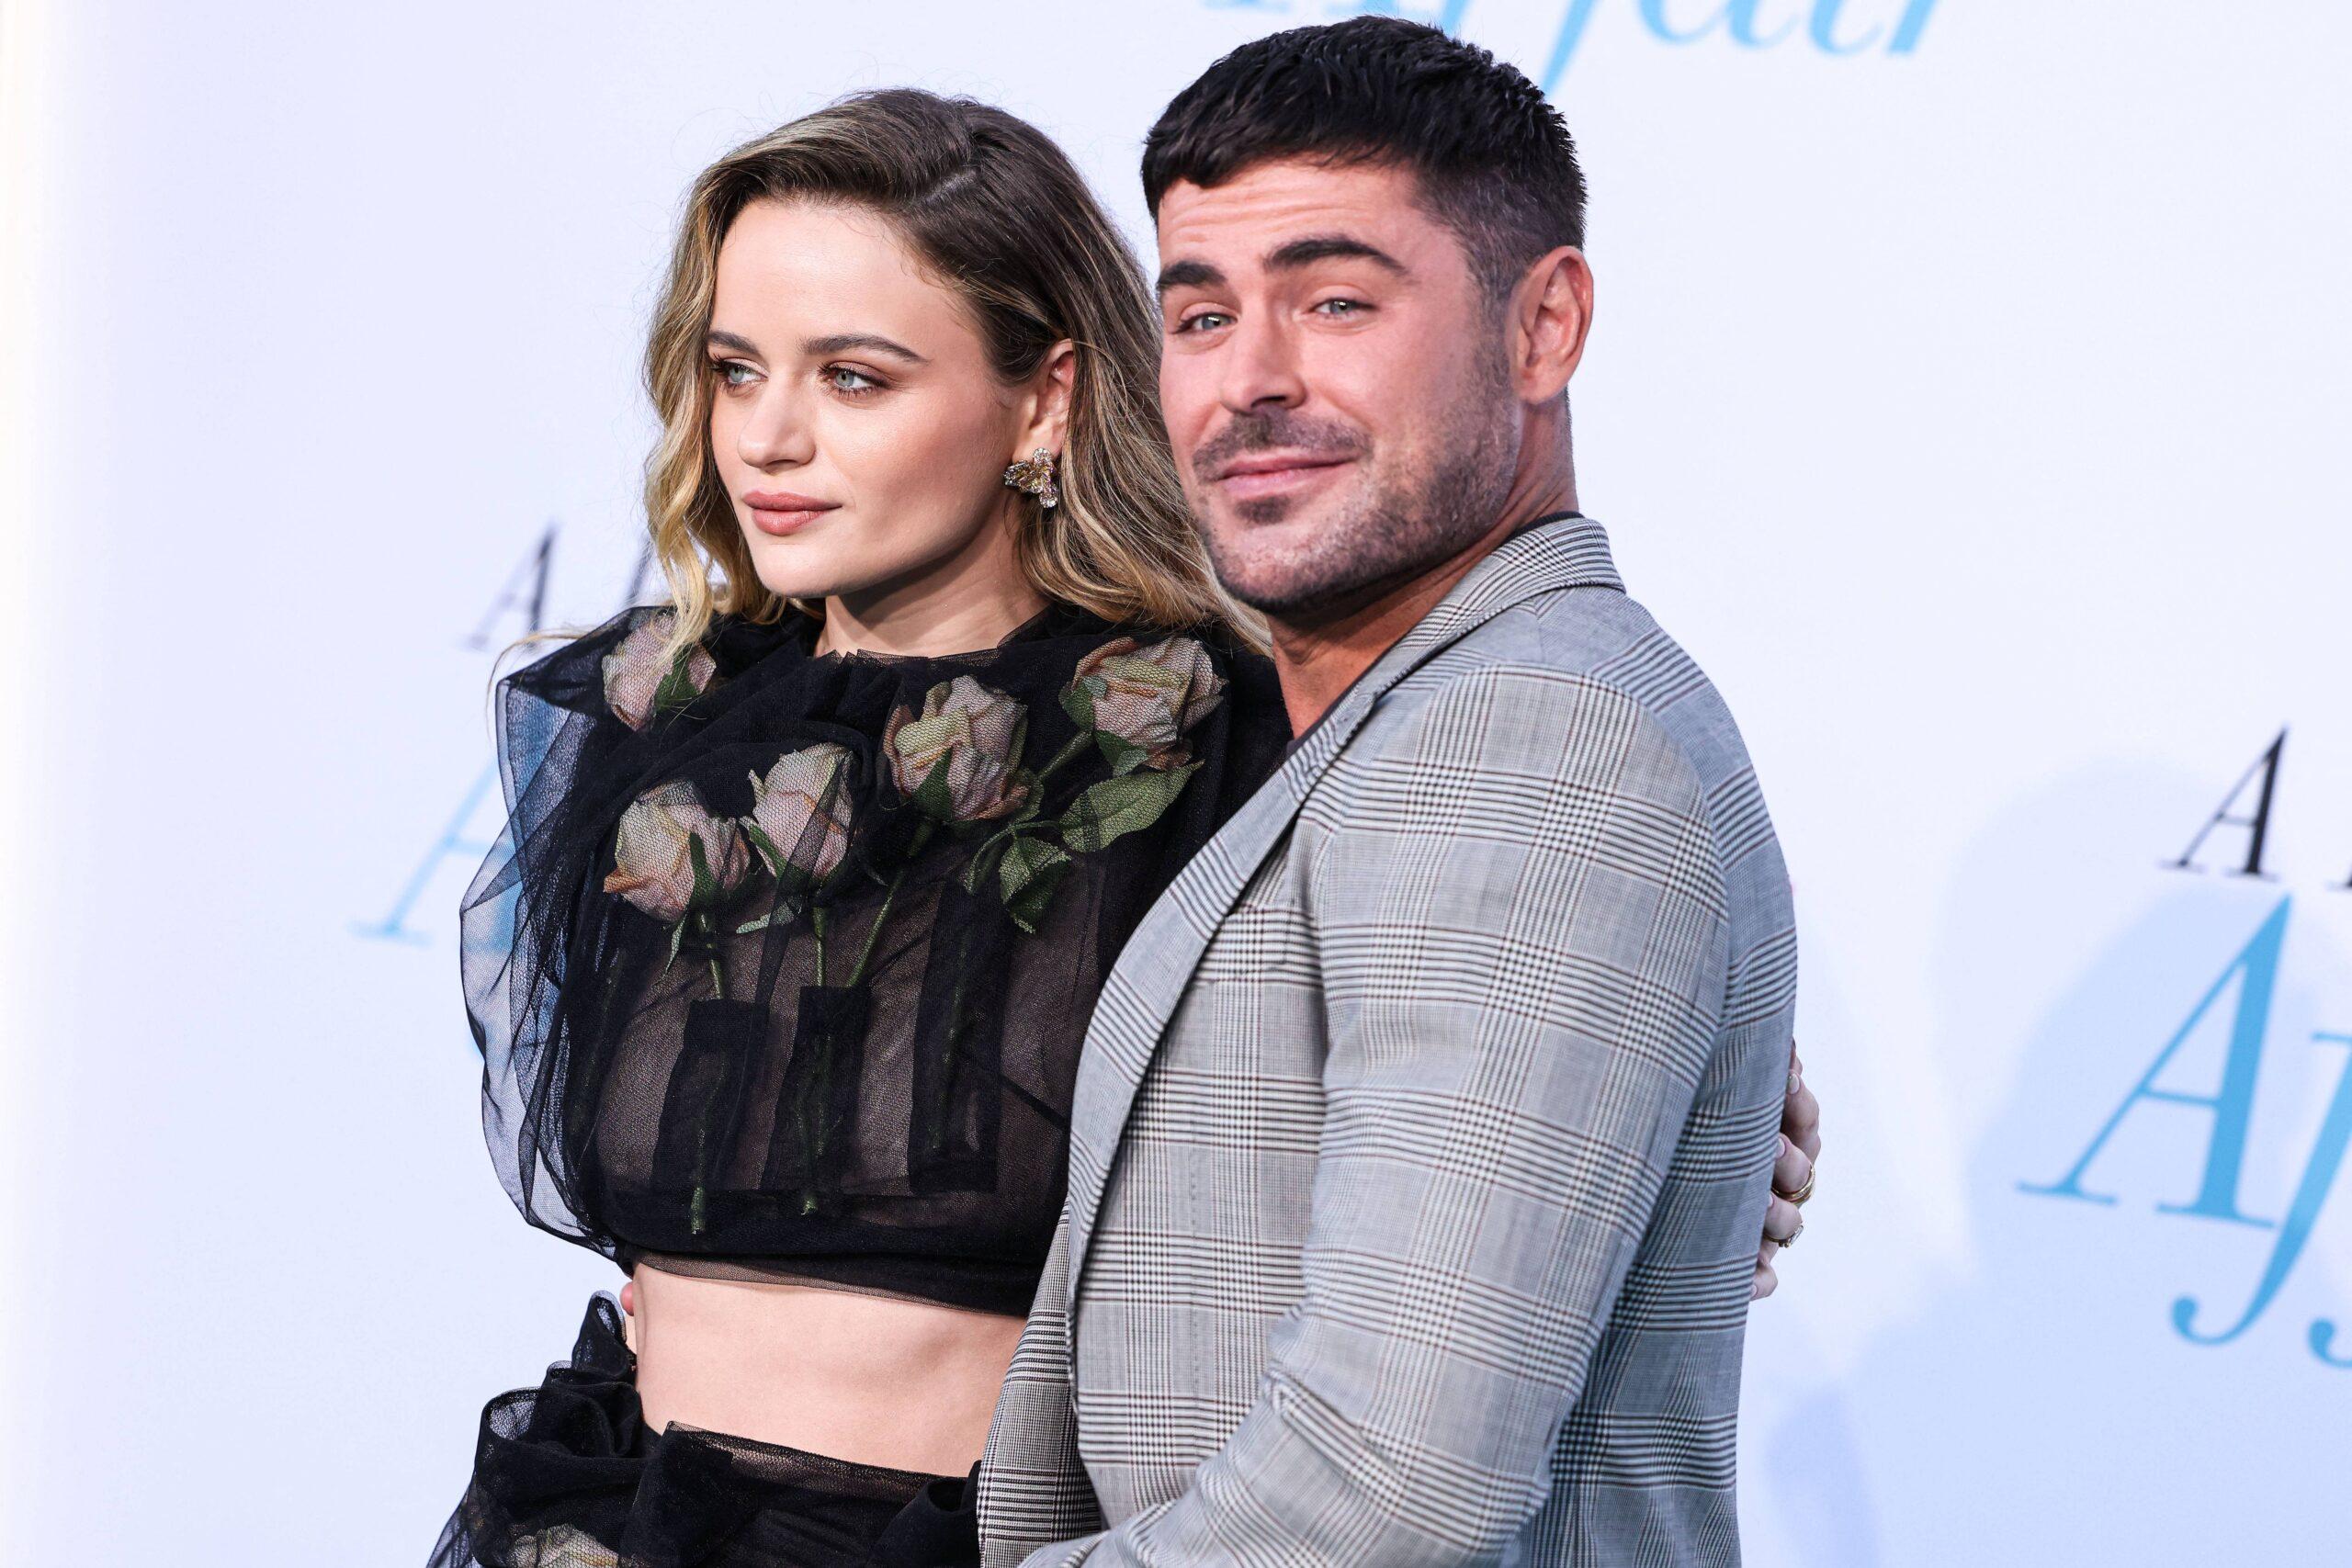 Joey King and Zac Efron at A Family Affair World Premiere